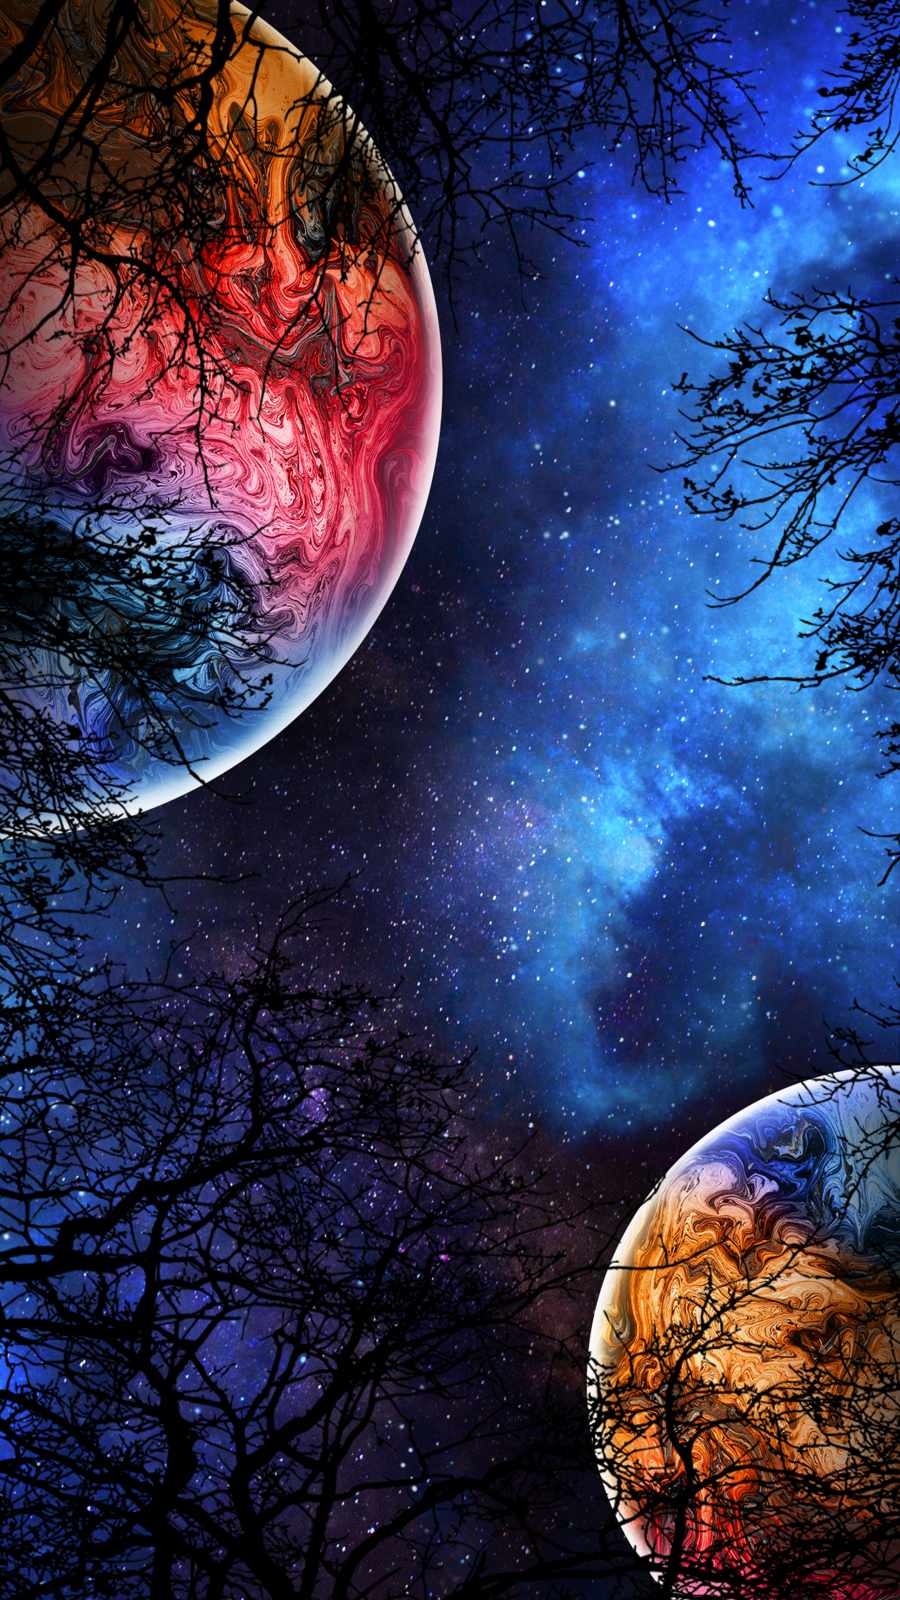 Planets Colliding IPhone Wallpaper   IPhone Wallpapers iPhone